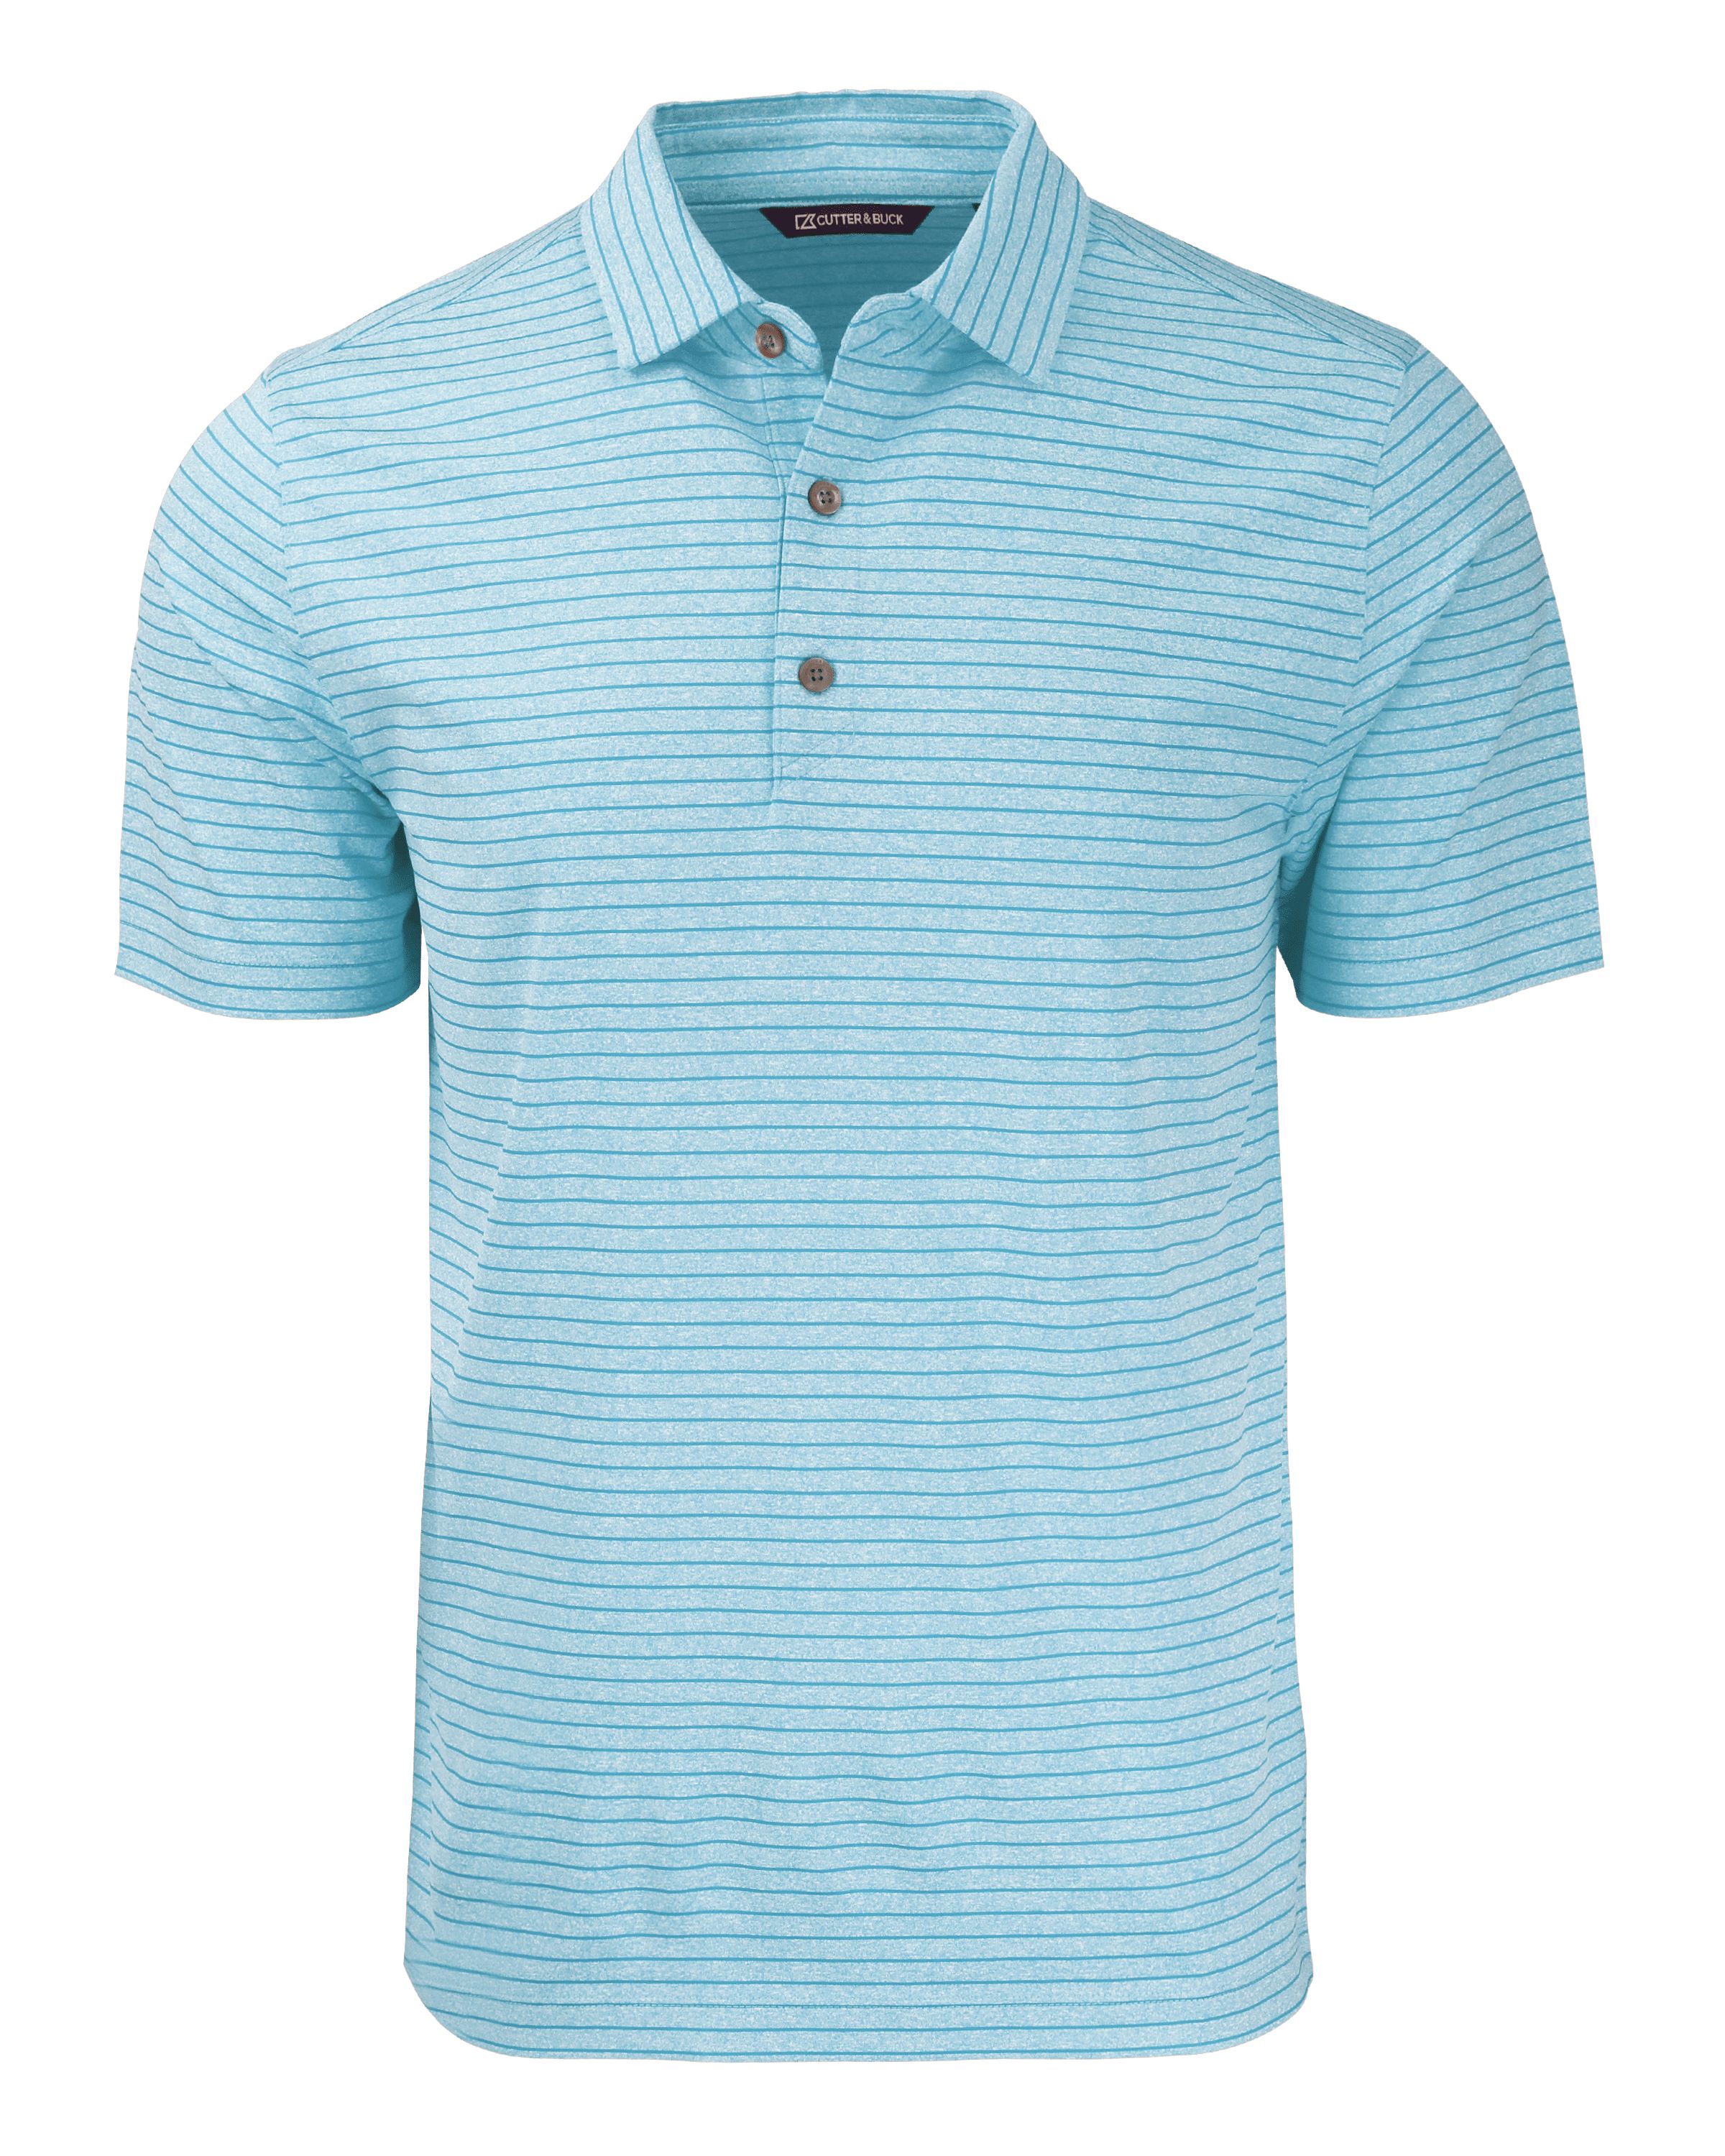 CUTTER & BUCK BCK01303 - Men's Forge Eco Heather Stripe Stretch Recycled Big & Tall Polo